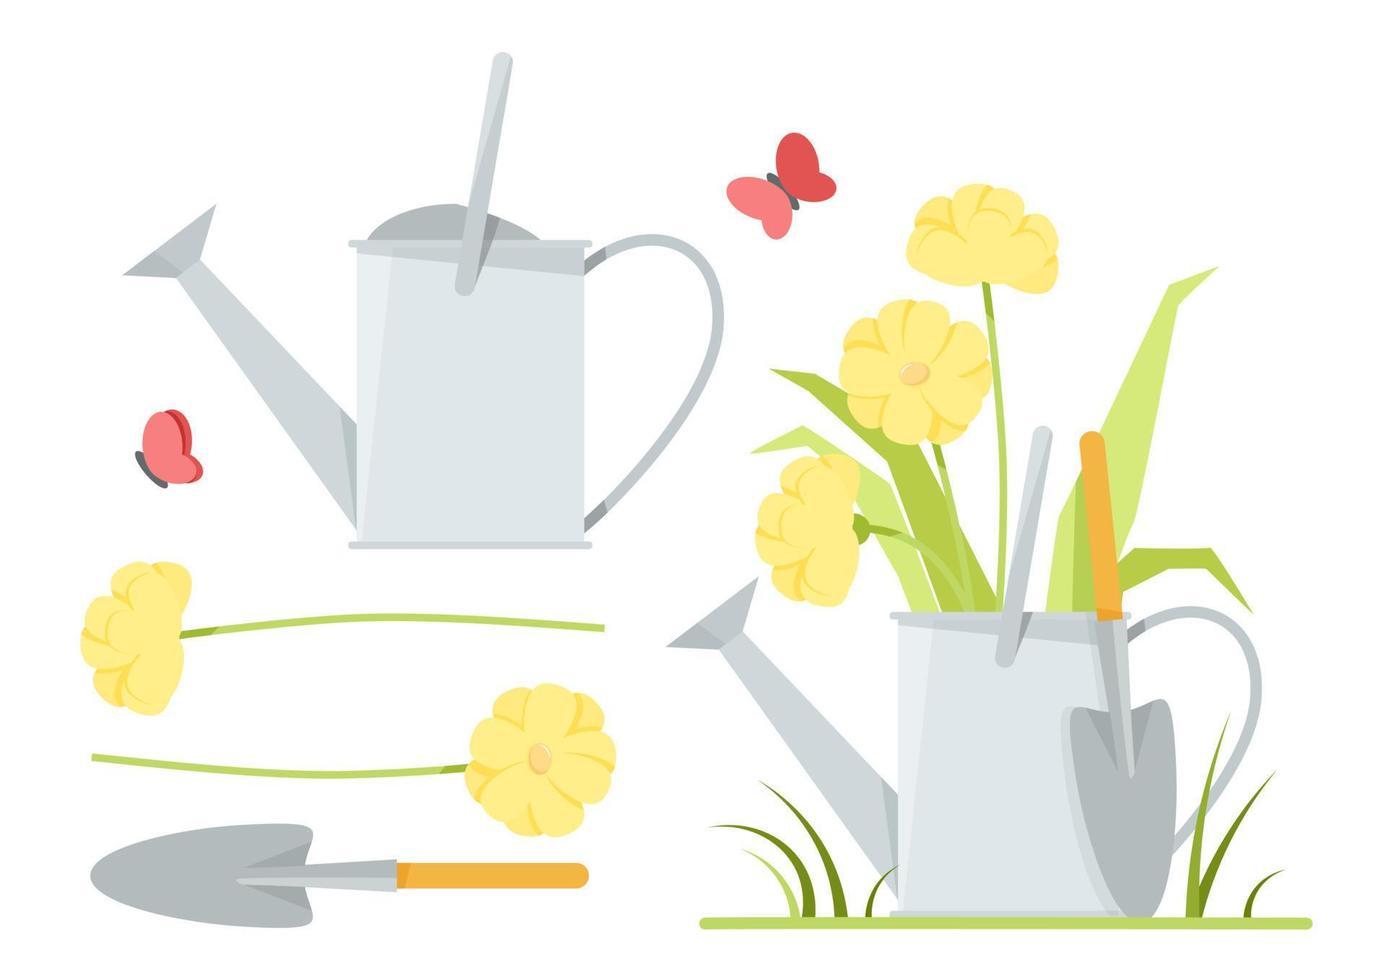 Clip art of gardening tools and watering can with flowers vector